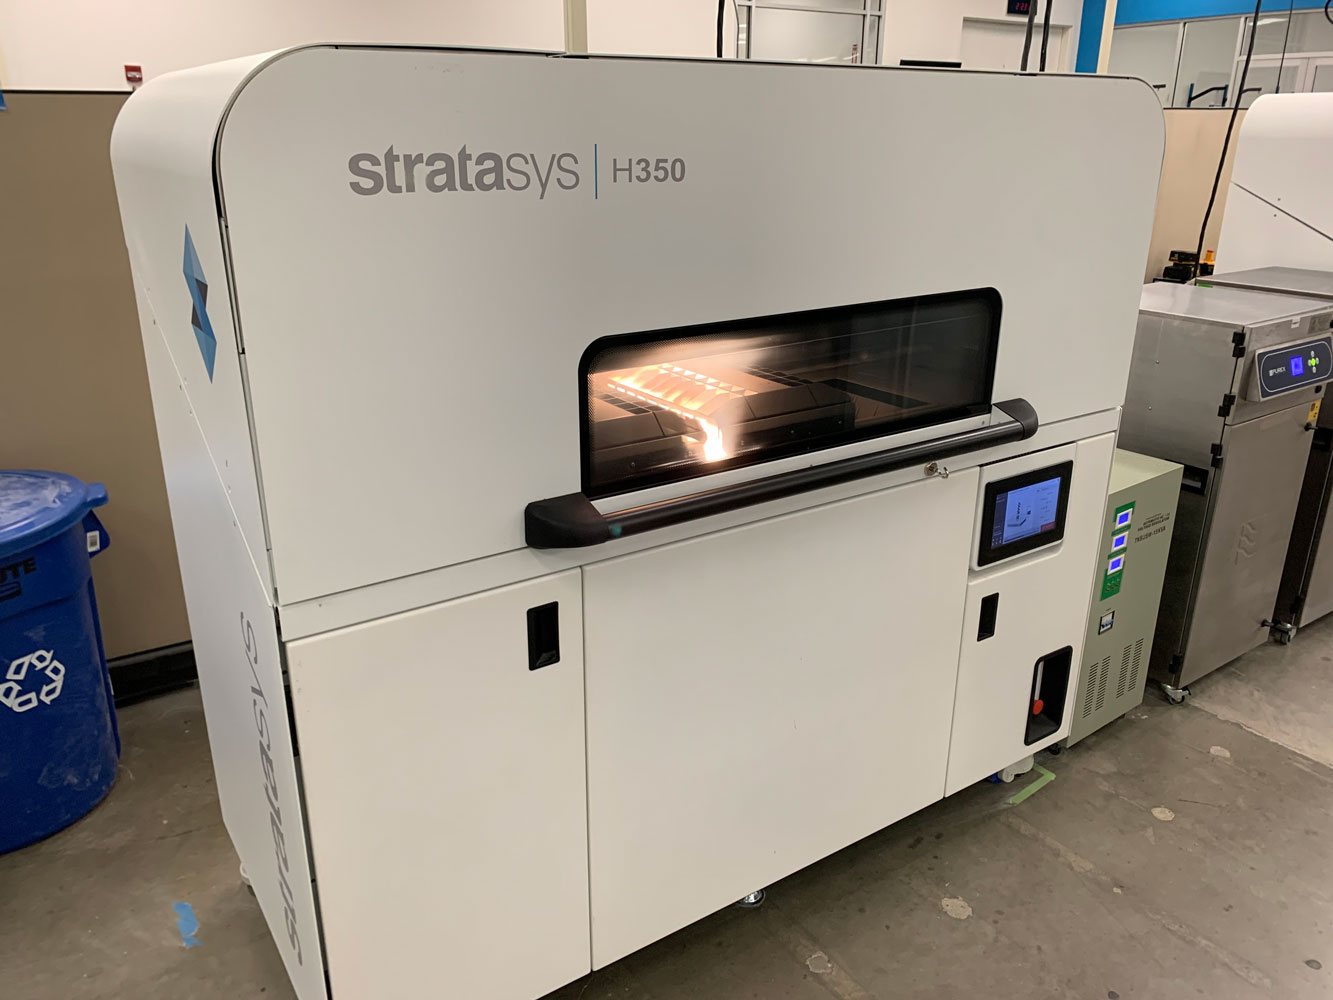 This H350 3D printer is used to produce a range of high-quality, end-use products, some in large quantities, at Stratasys Direct Manufacturing’s facility in Austin, Texas. Image courtesy of Stratasys Direct Manufacturing.